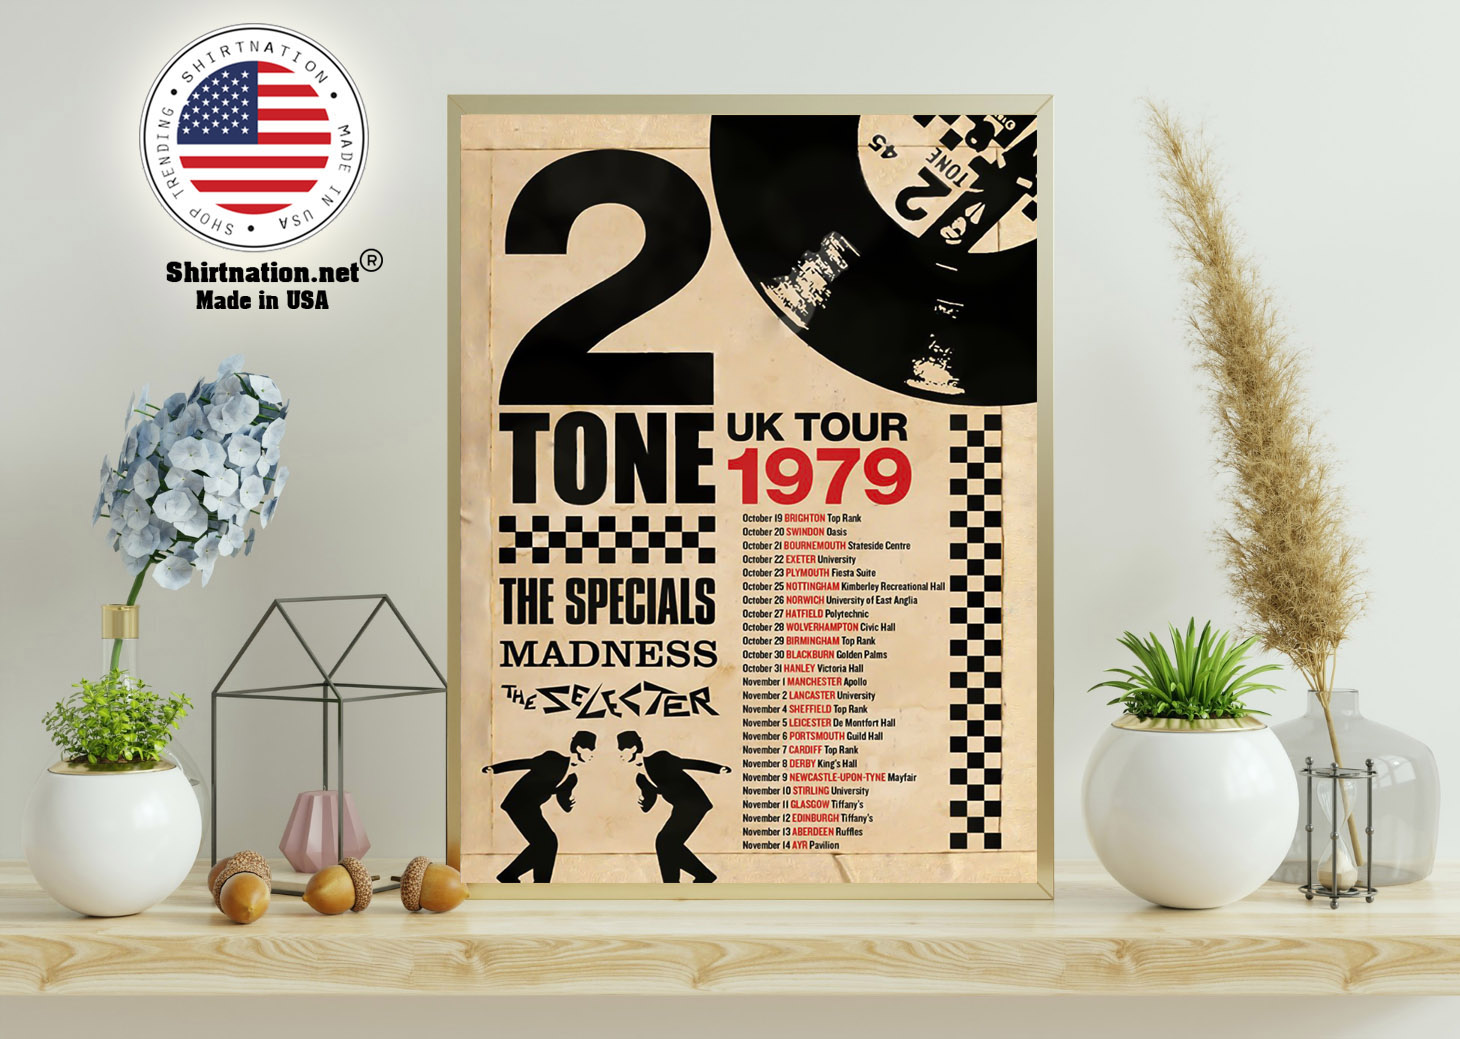 2 Tone UK tour 1979 the specials madness poster 11